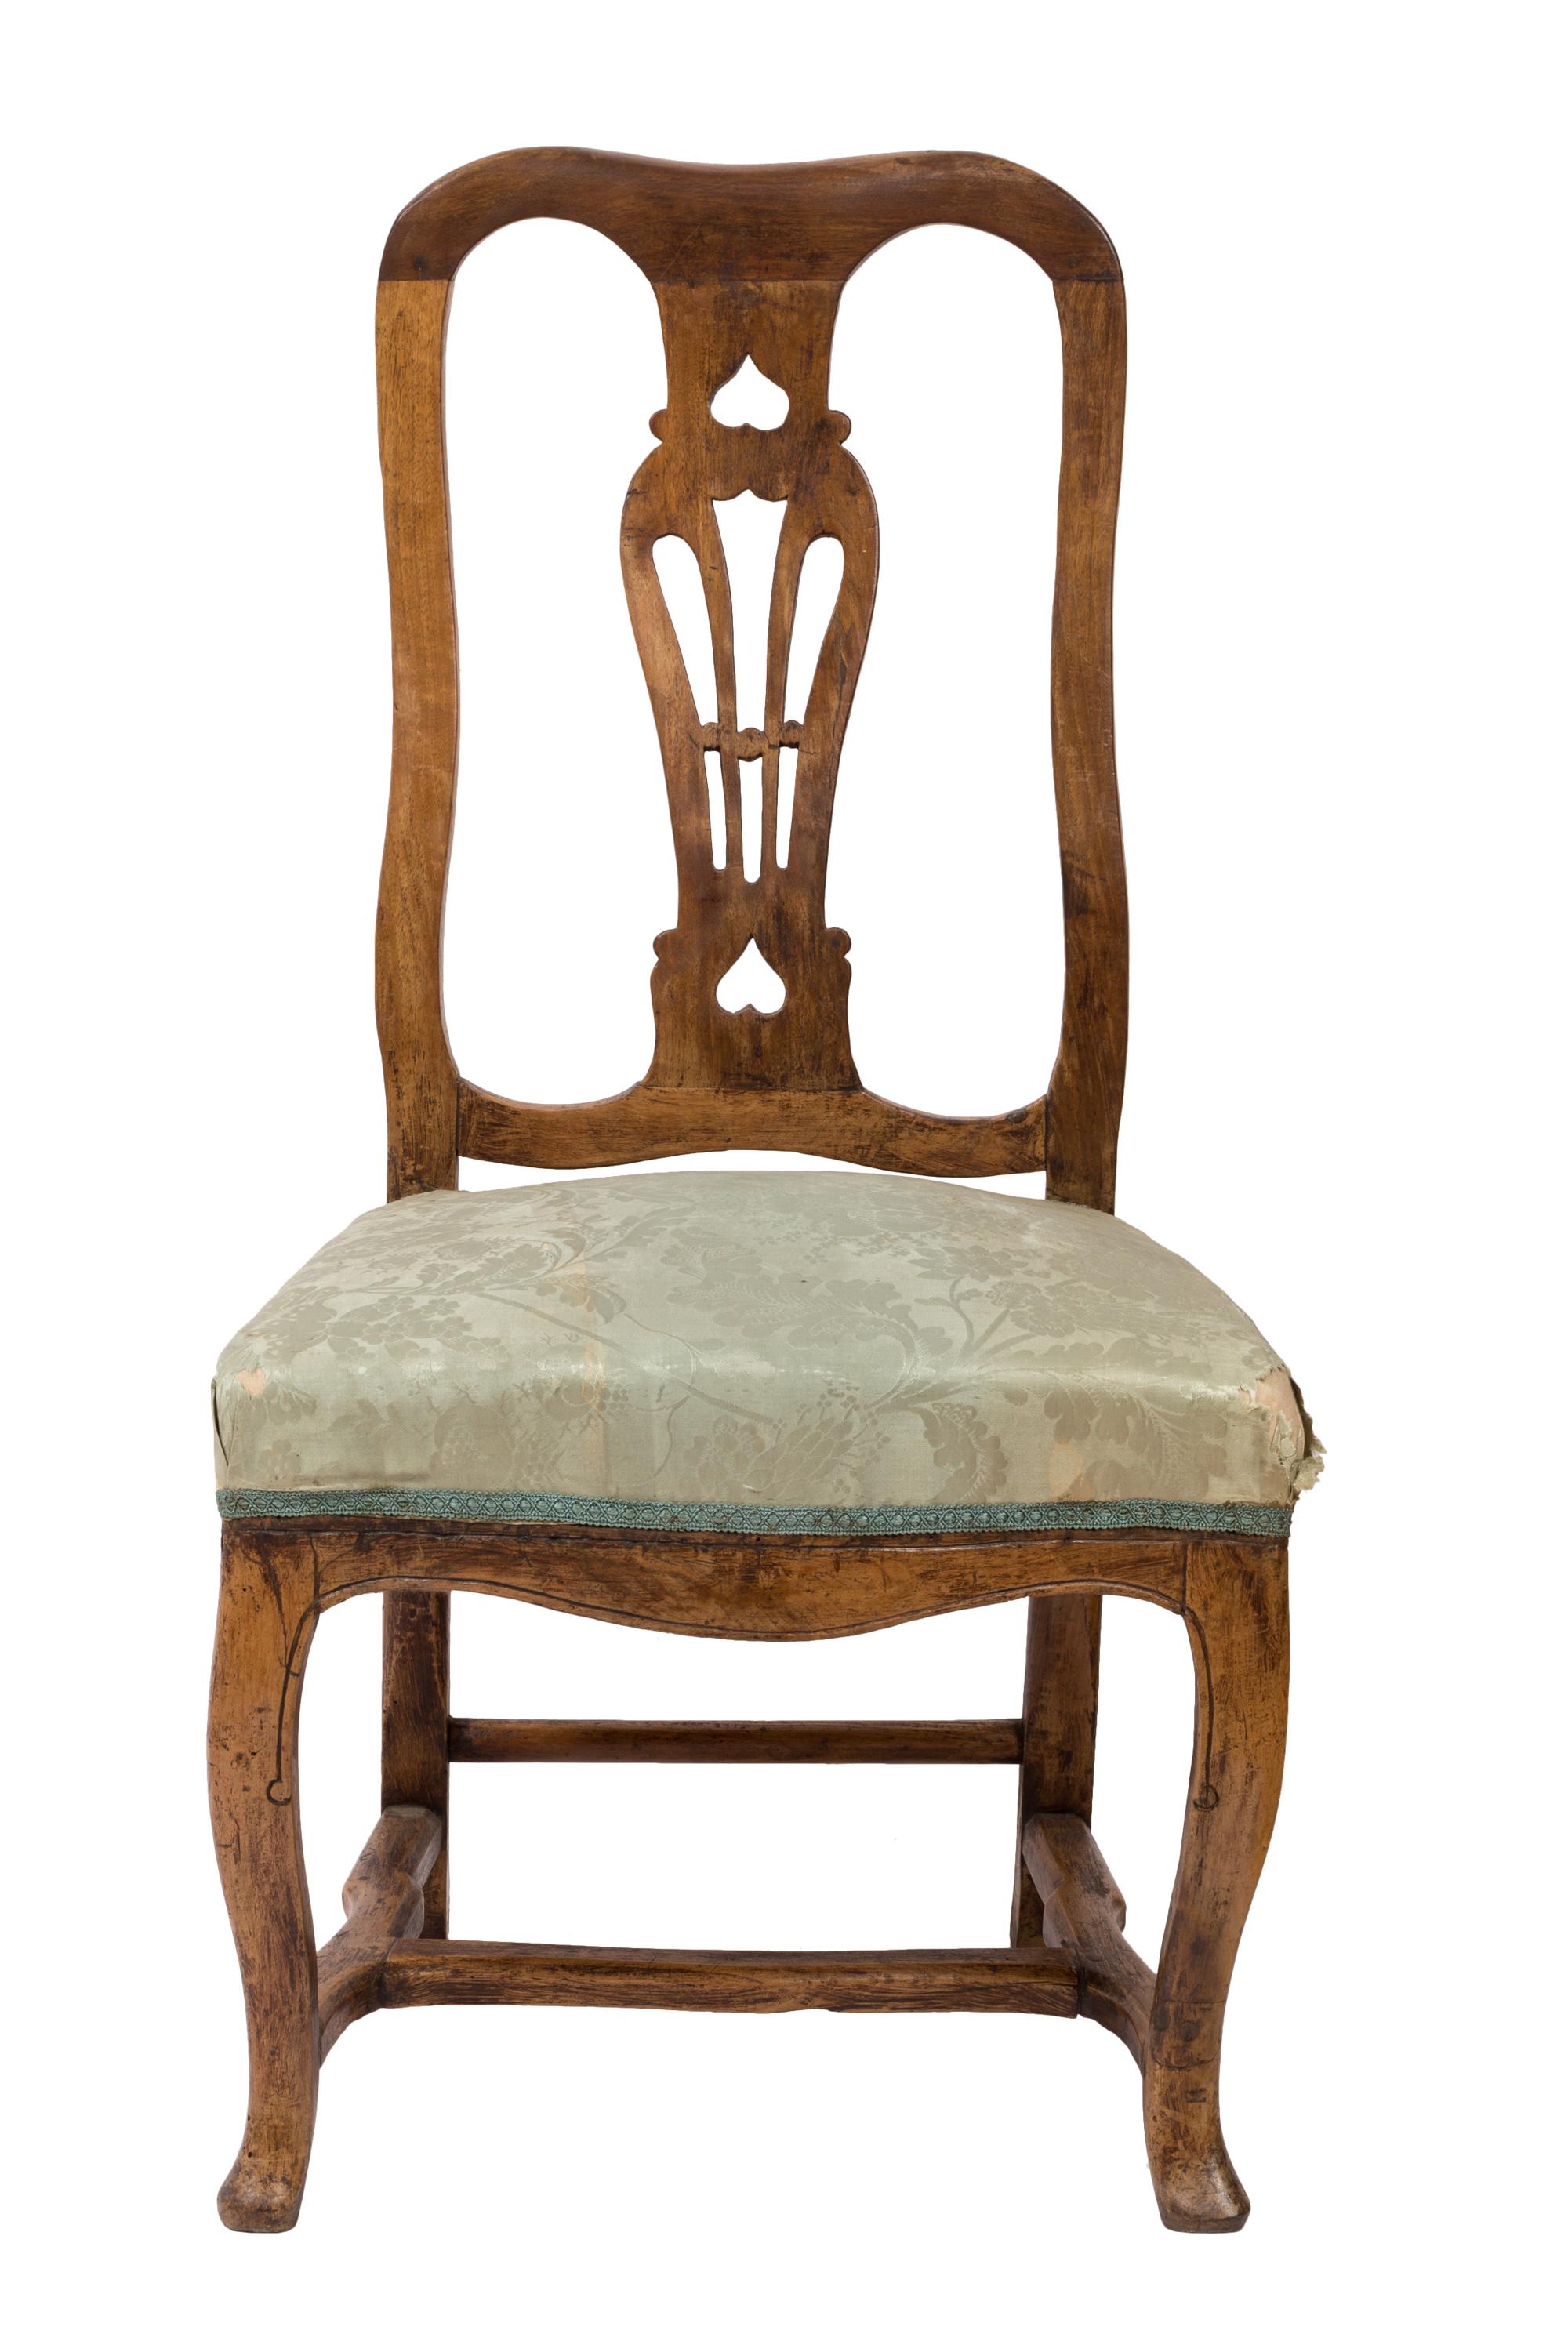 A matched set of four Queen Anne style side chairs, with urn-shaped pierced back splats. The wood furniture has great character - well constructed and solid, with a rustic handmade quality. Some light tool marks and vague asymmetry show the hand of